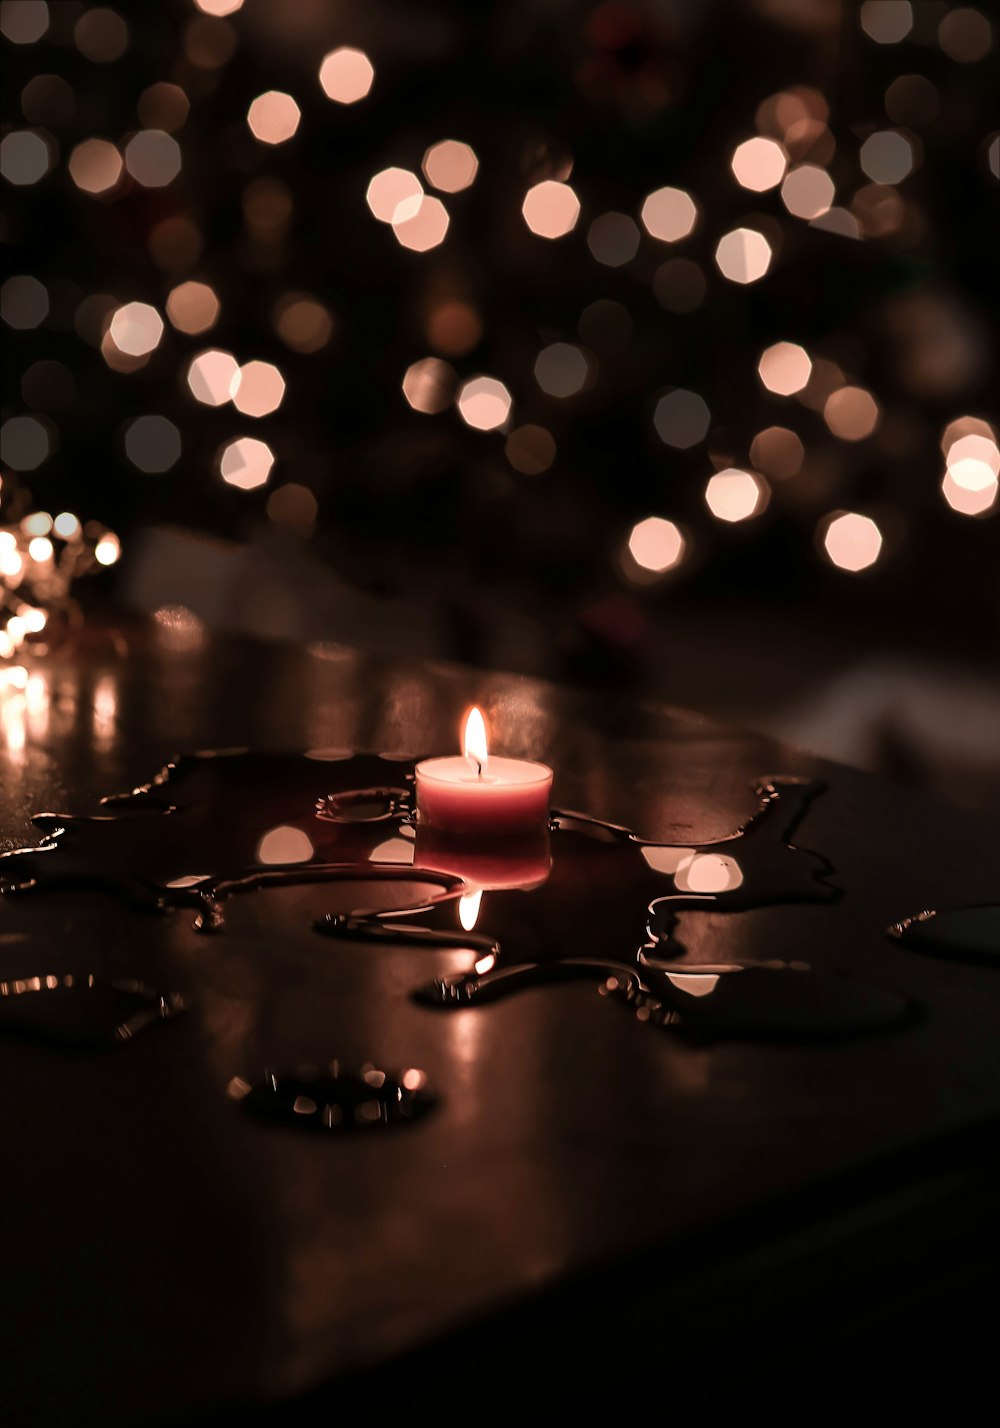 Candle Light Dinner Pictures | Download Free Images on Unsplash